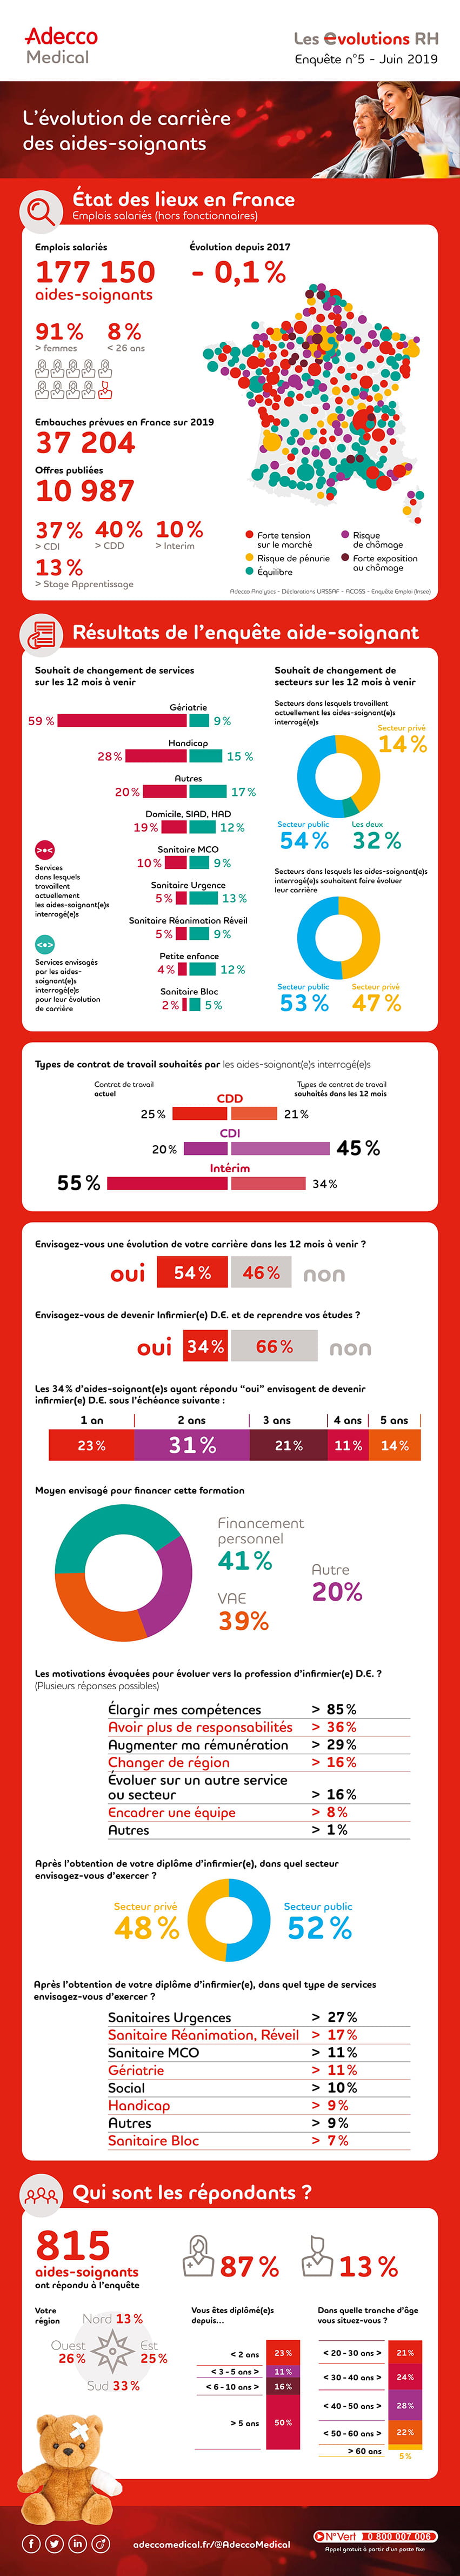 infographie-adecco-medical-aide-soignant